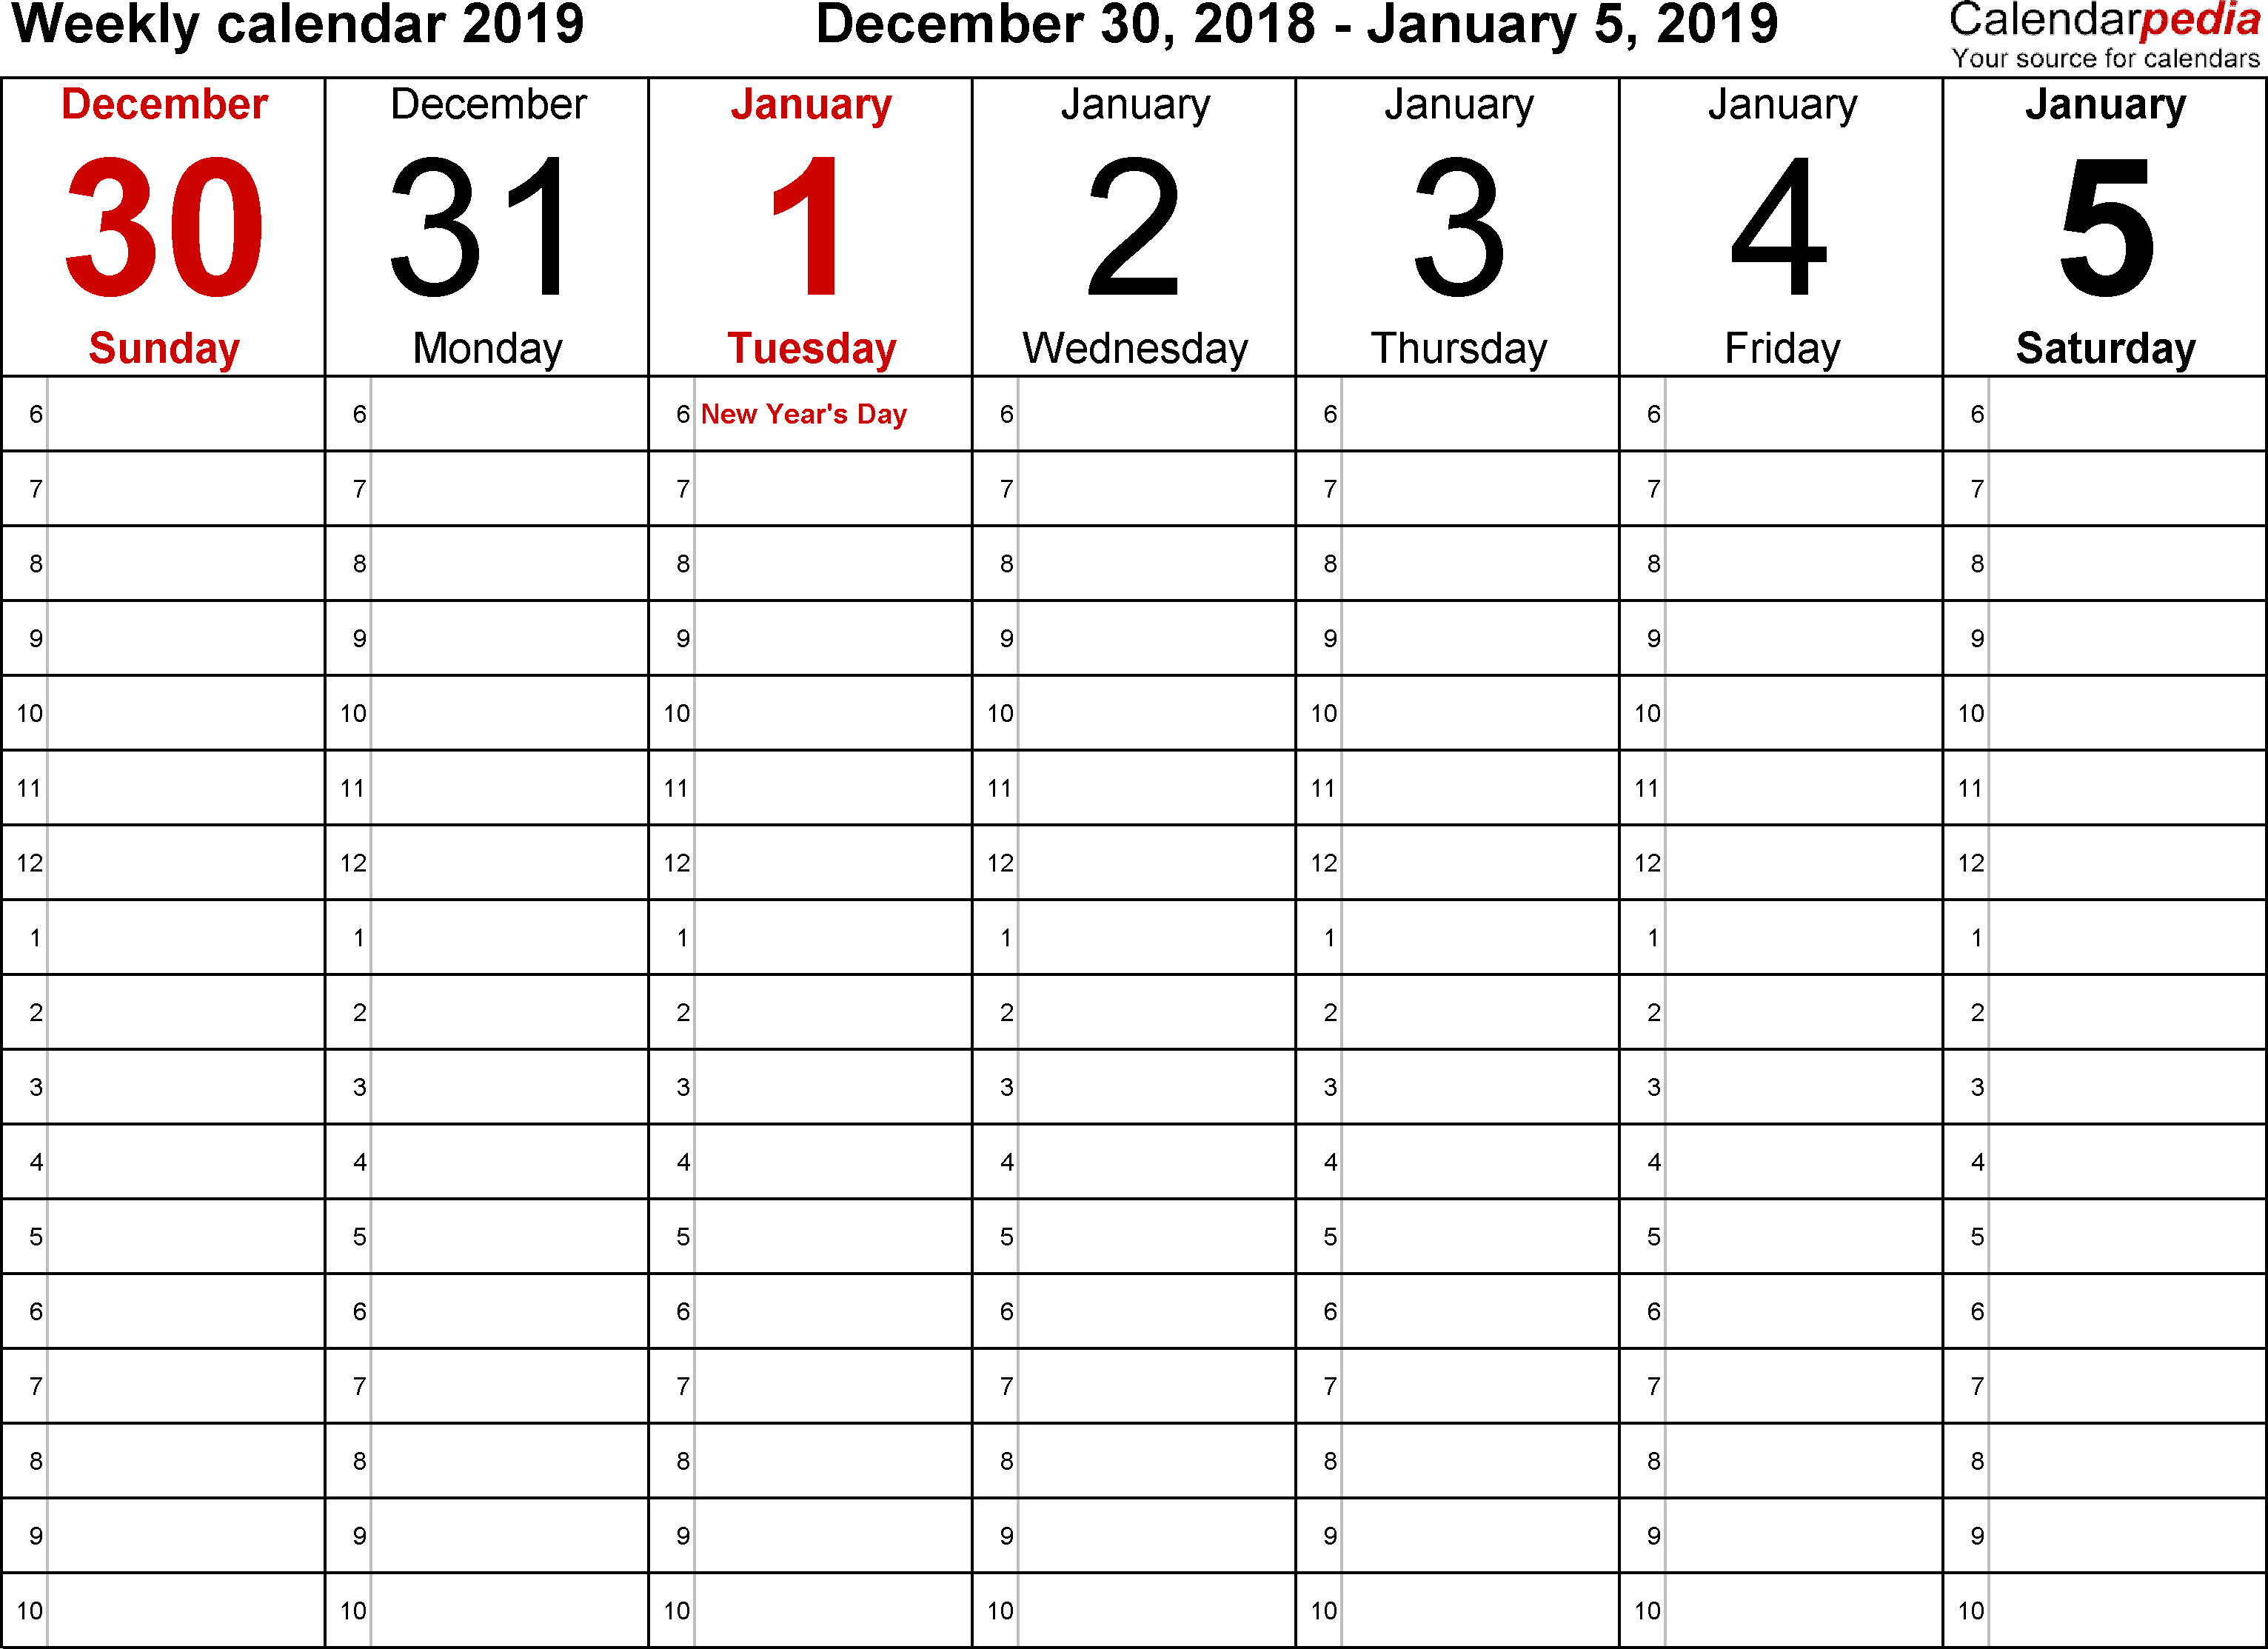 Weekly Calendar 2019 For Excel - 12 Free Printable Templates